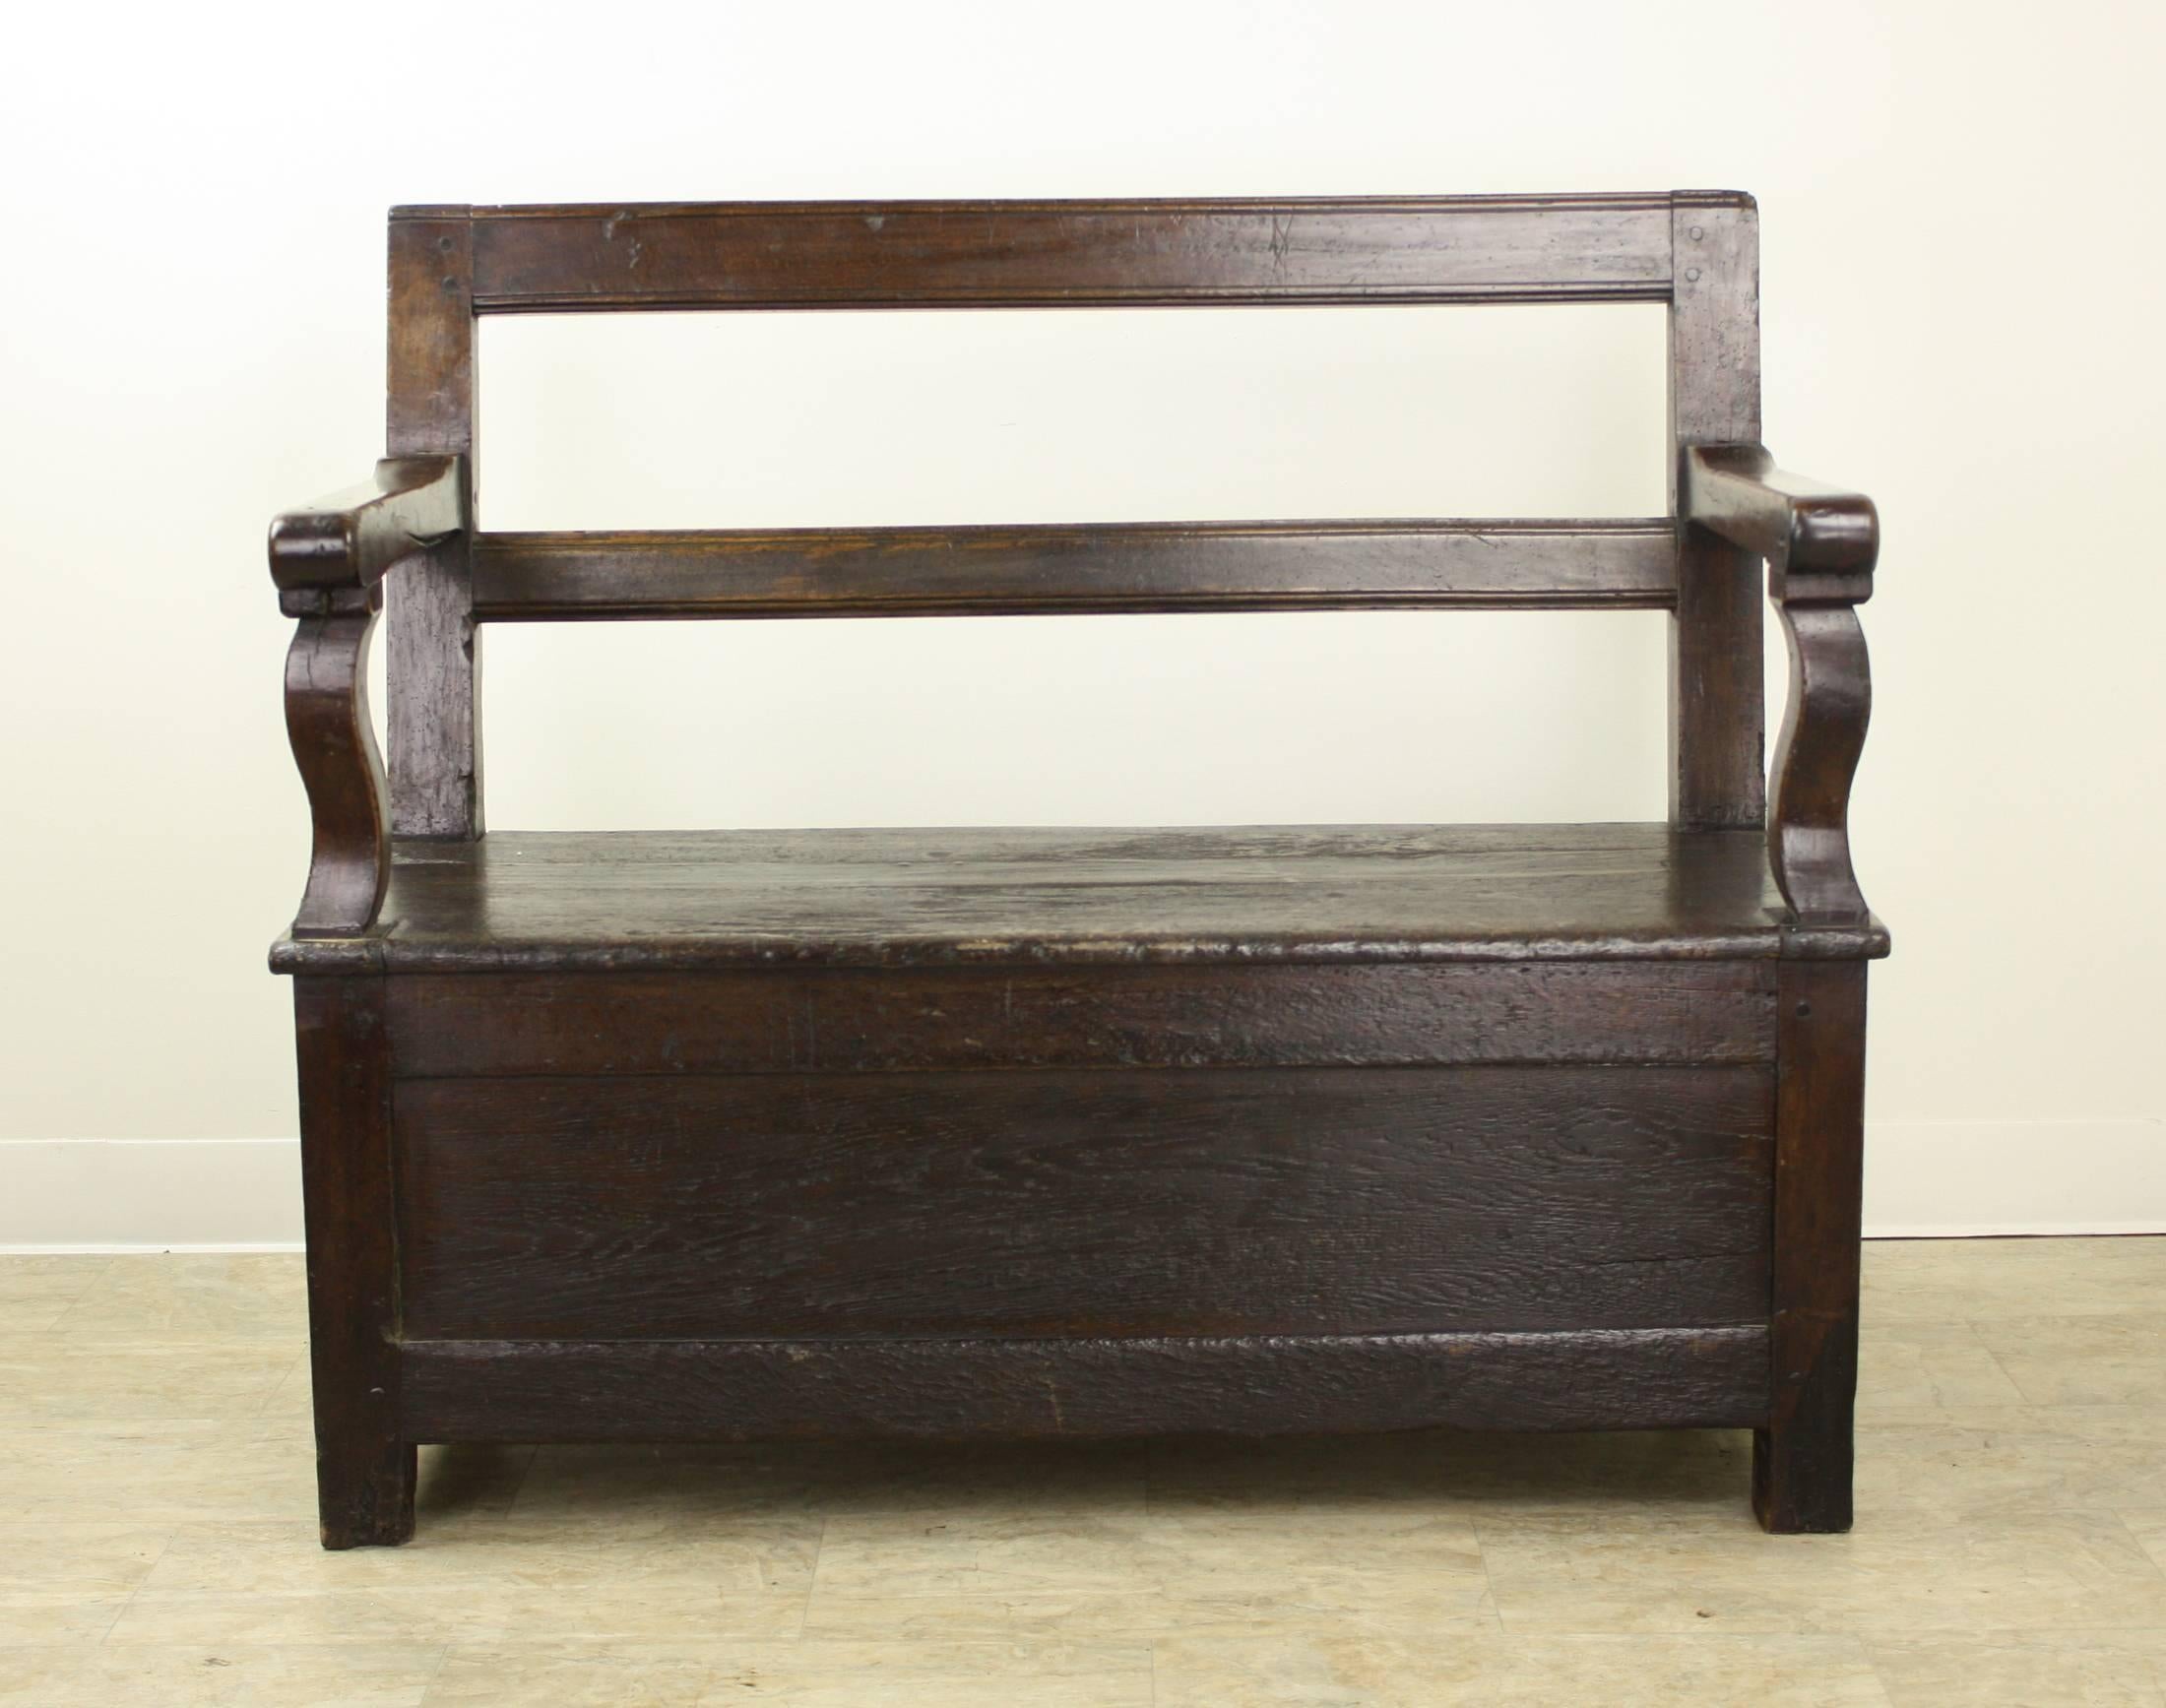 A very nice, rustic, sturdy bench, often found near the fireside, to hold wood or kindling. In this case, the storage area is a pull-out drawer on one side. Terrific deep color and patina. Really nicely shaped arms.